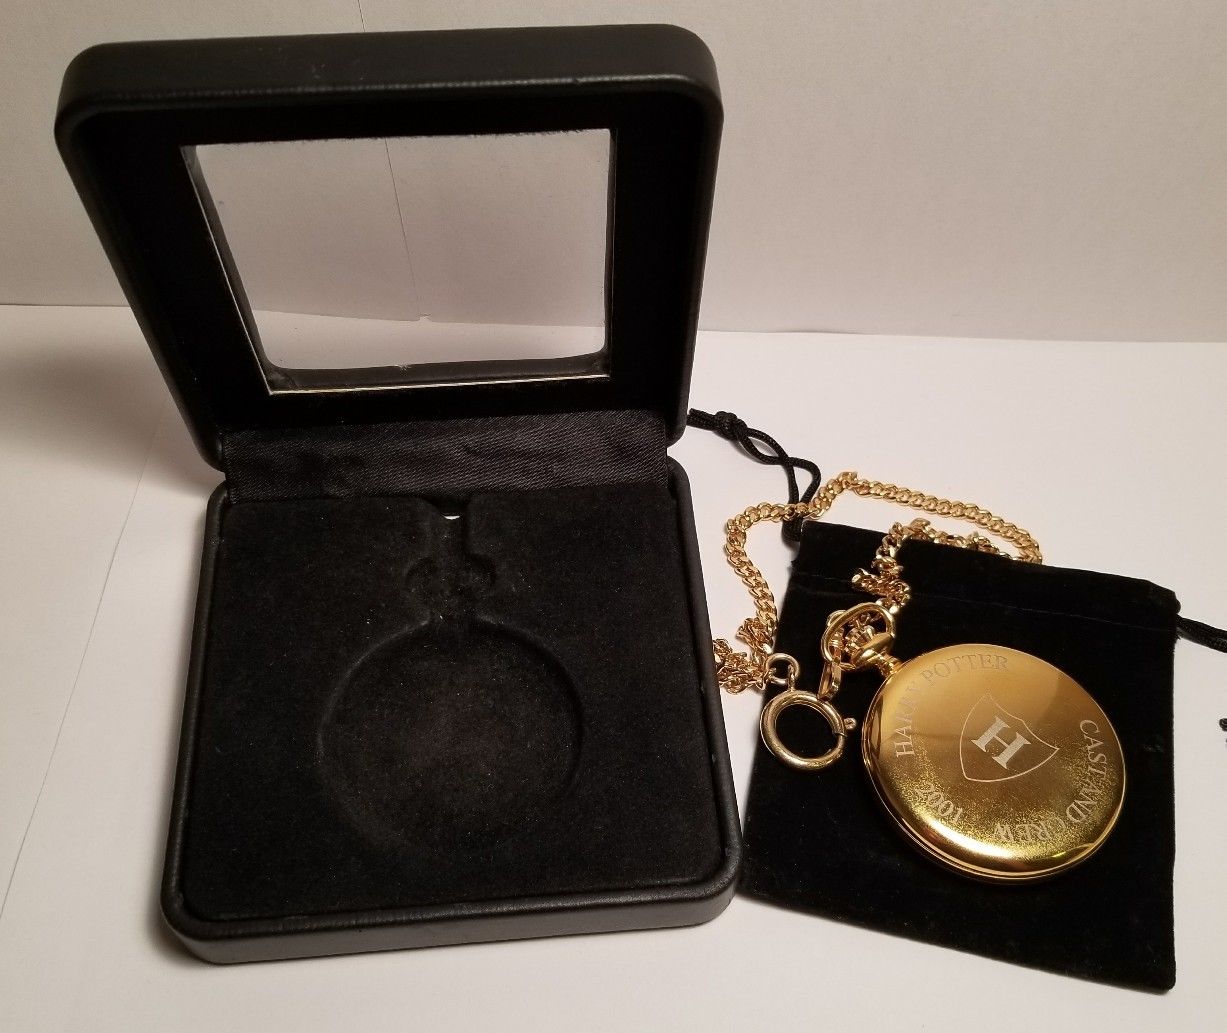 Harry potter and the sorcerer's stone cast and crew gift pocketwatch prop